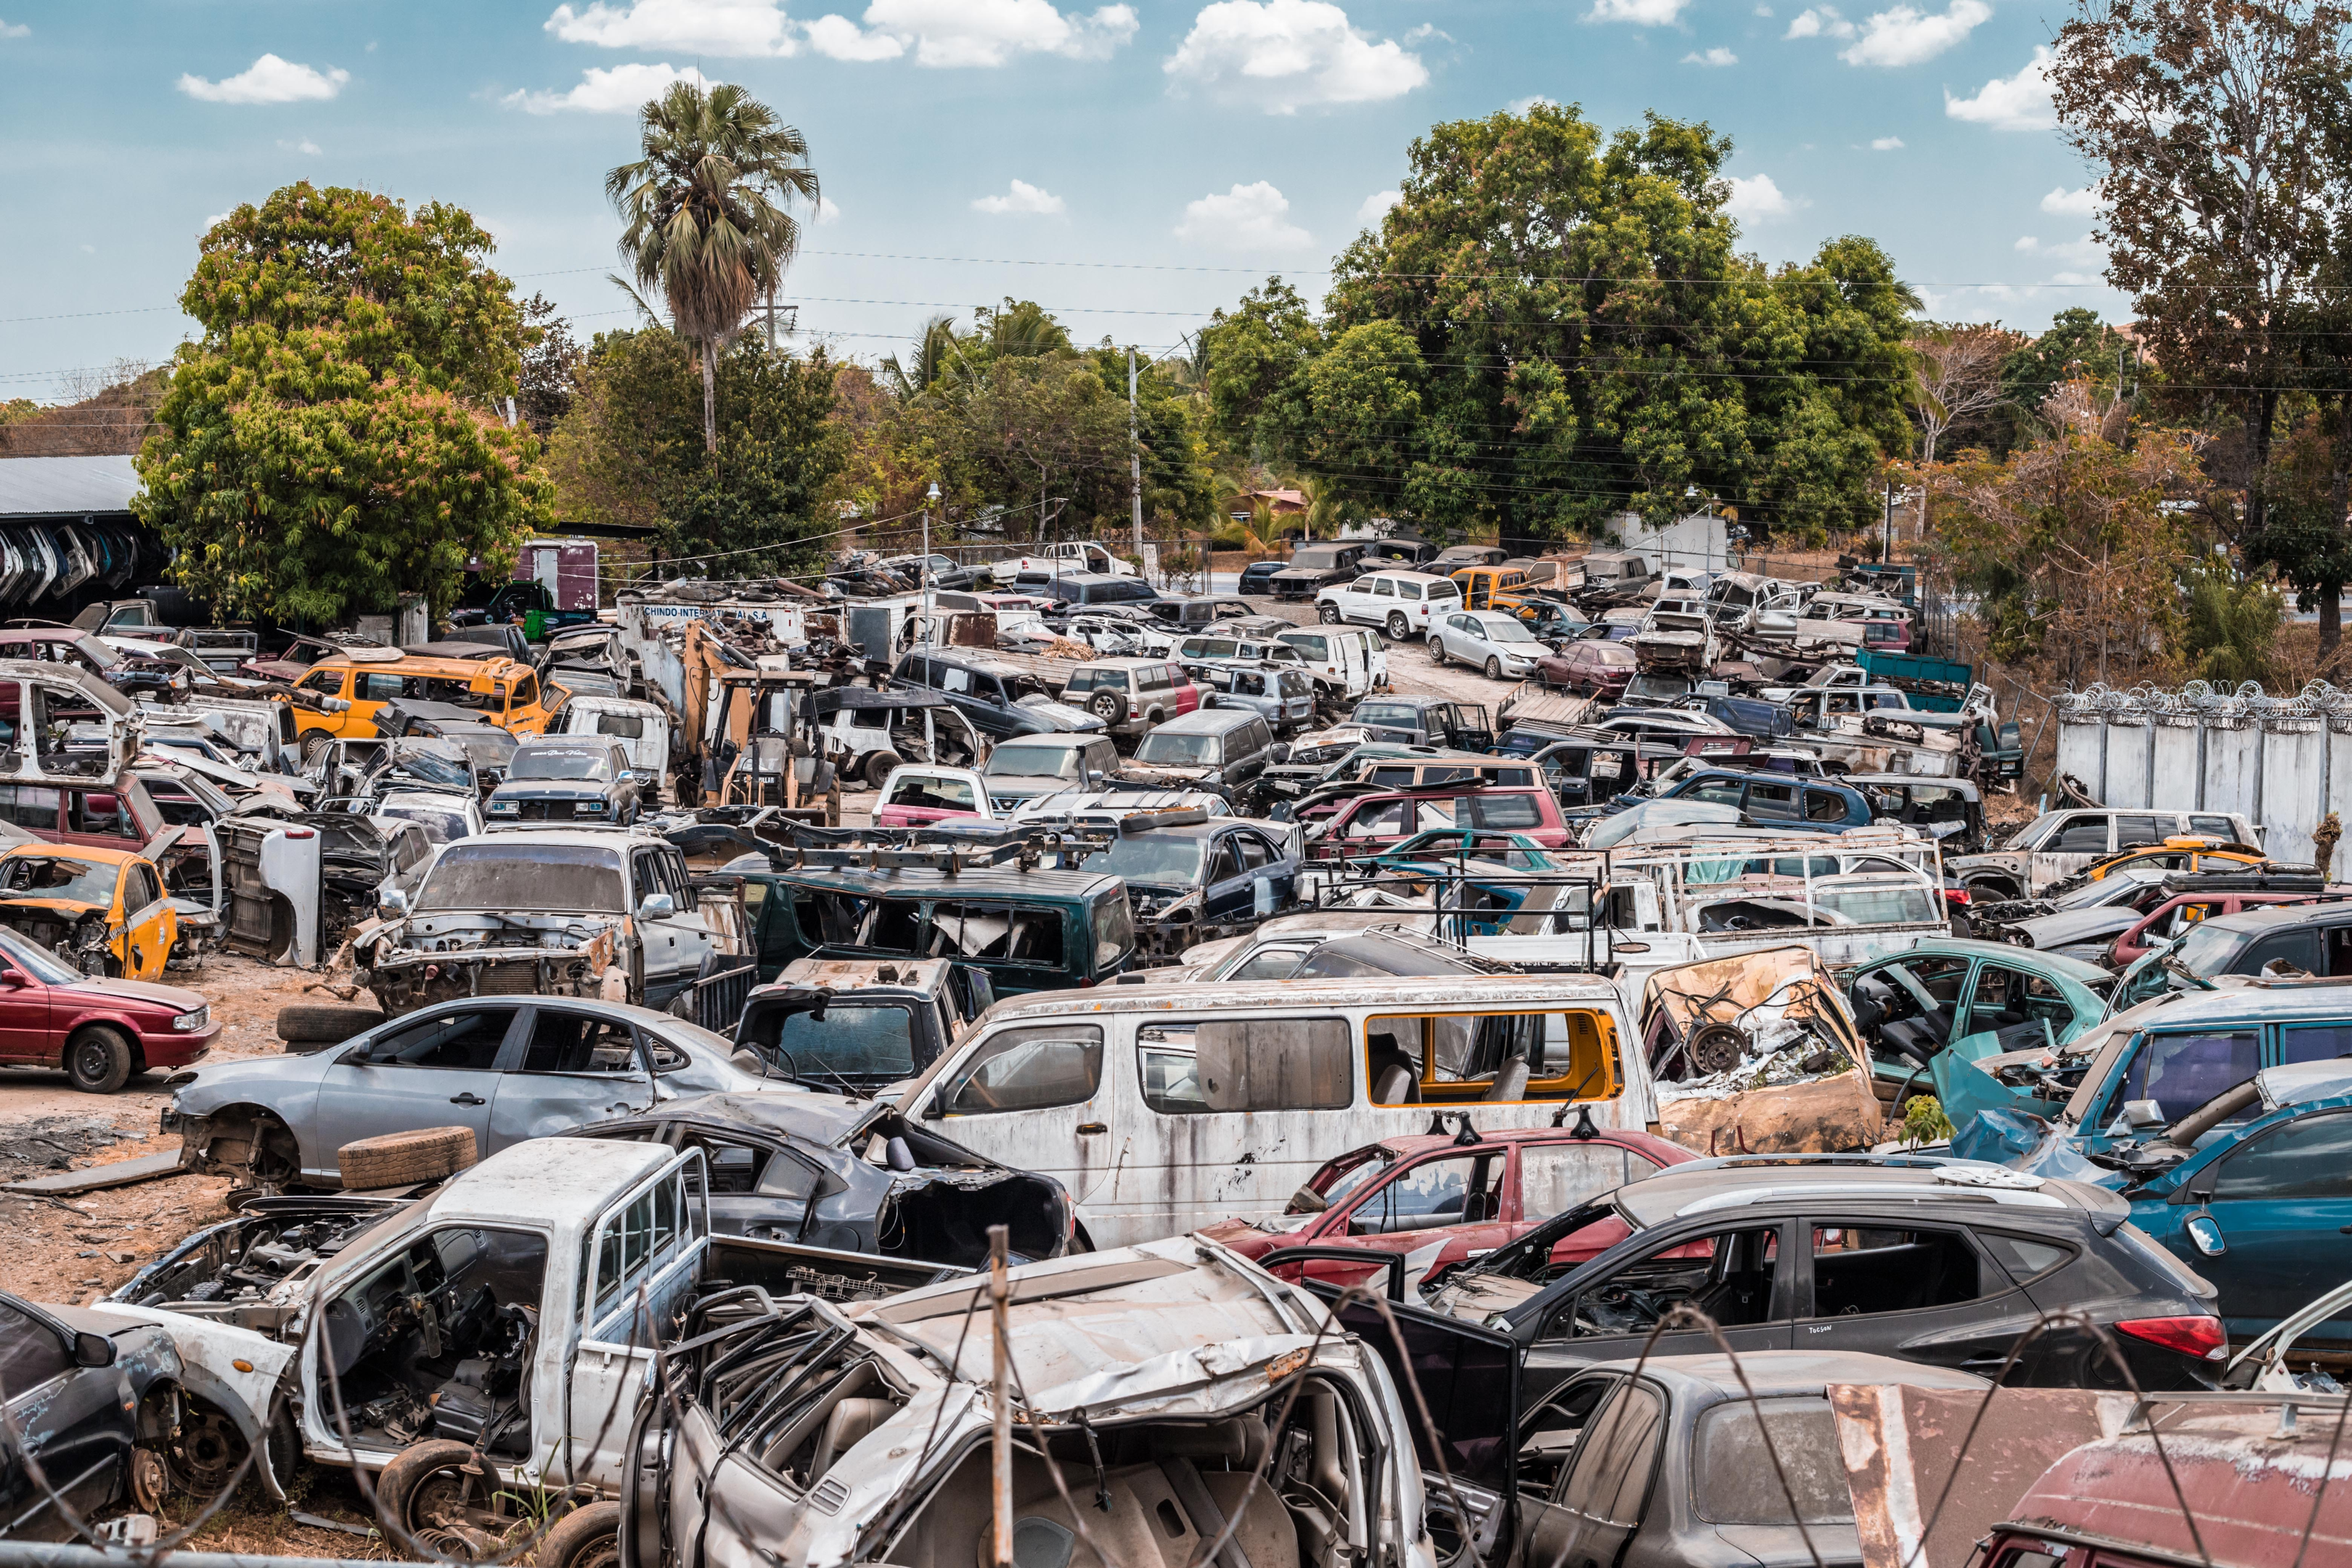 Scrap Metal Recyclers gives cash for damaged cars